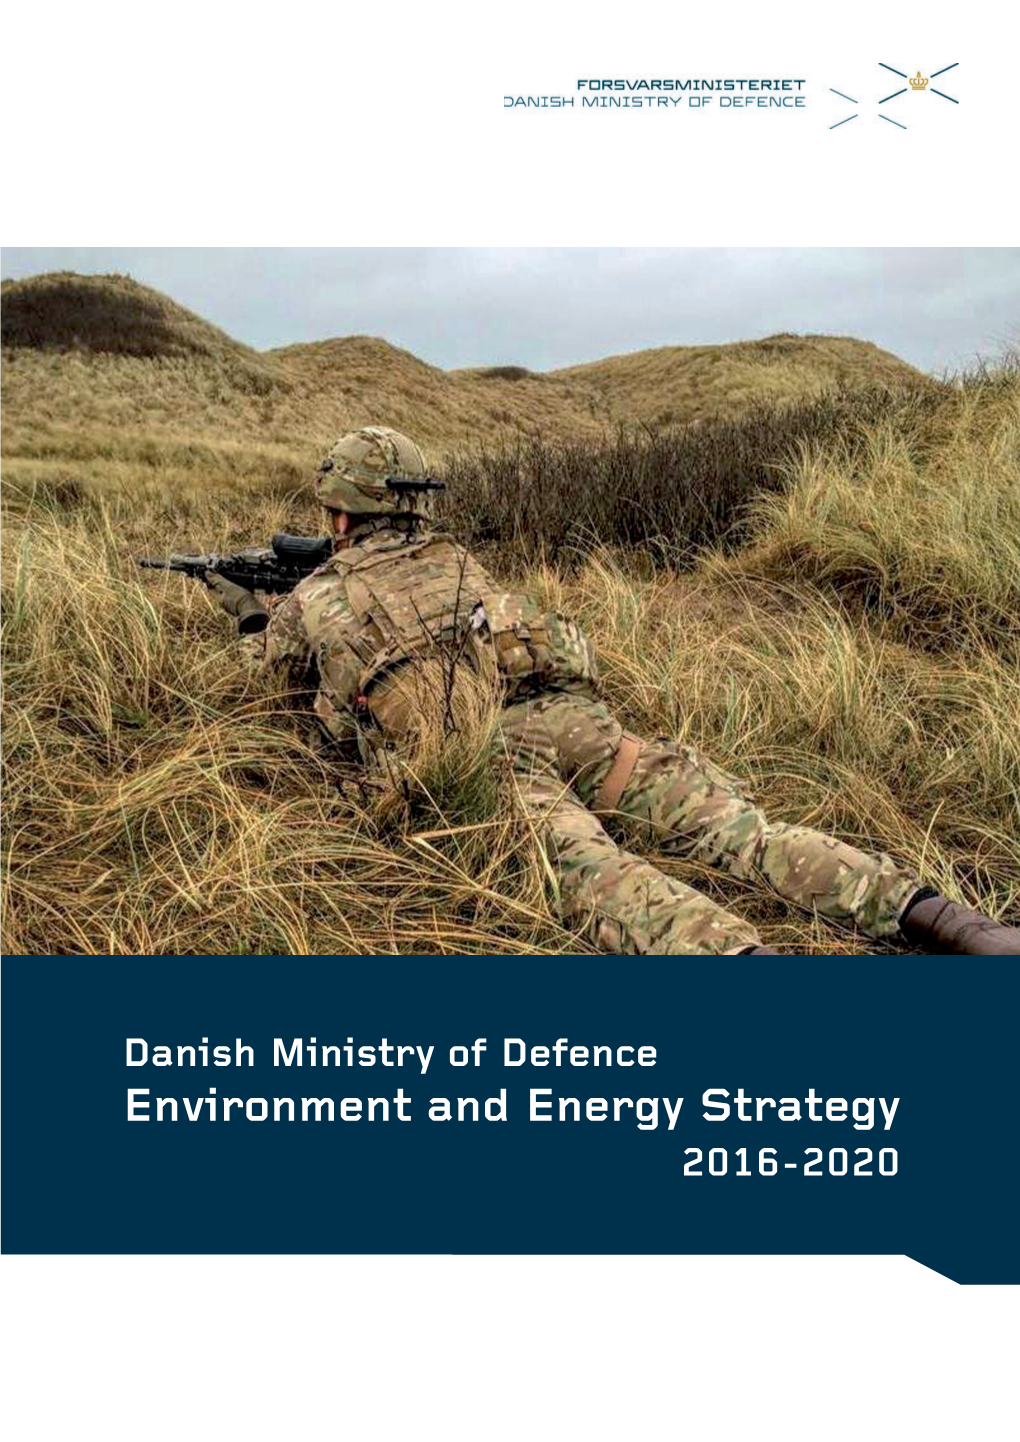 Read the Environment and Energy Strategy 2016 – 2020